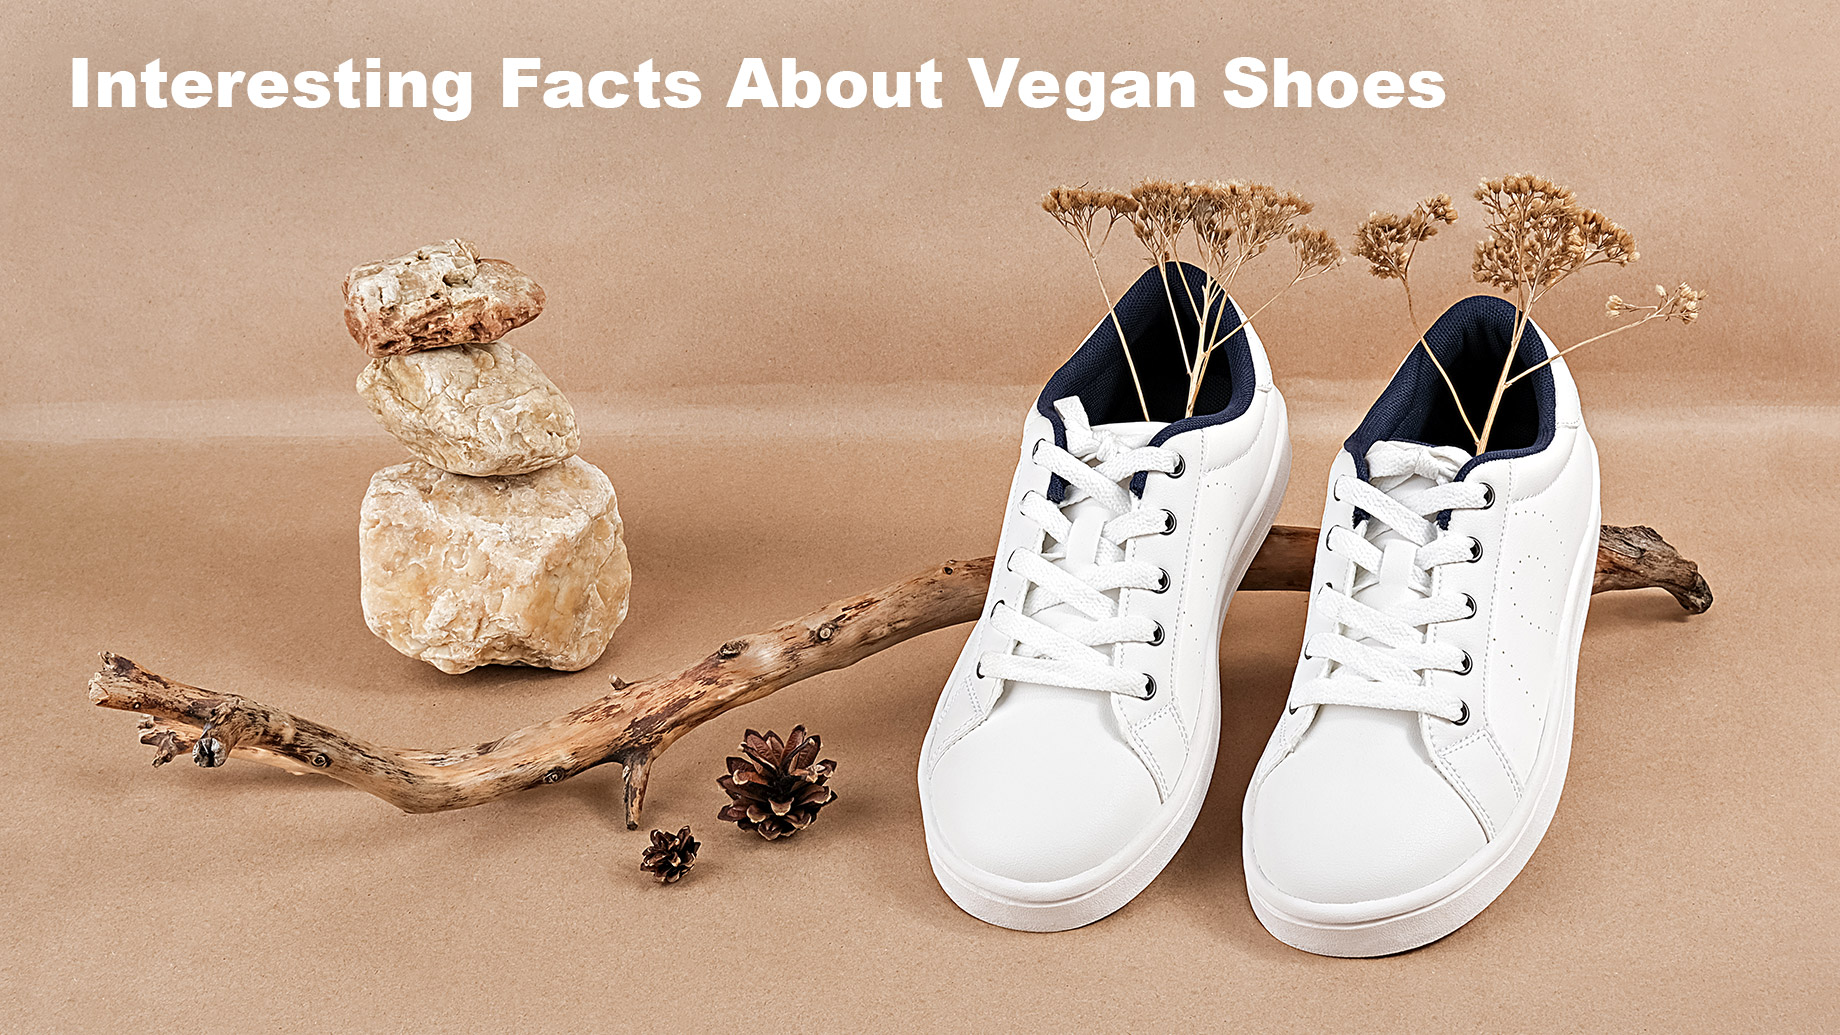 Interesting Facts About Vegan Shoes